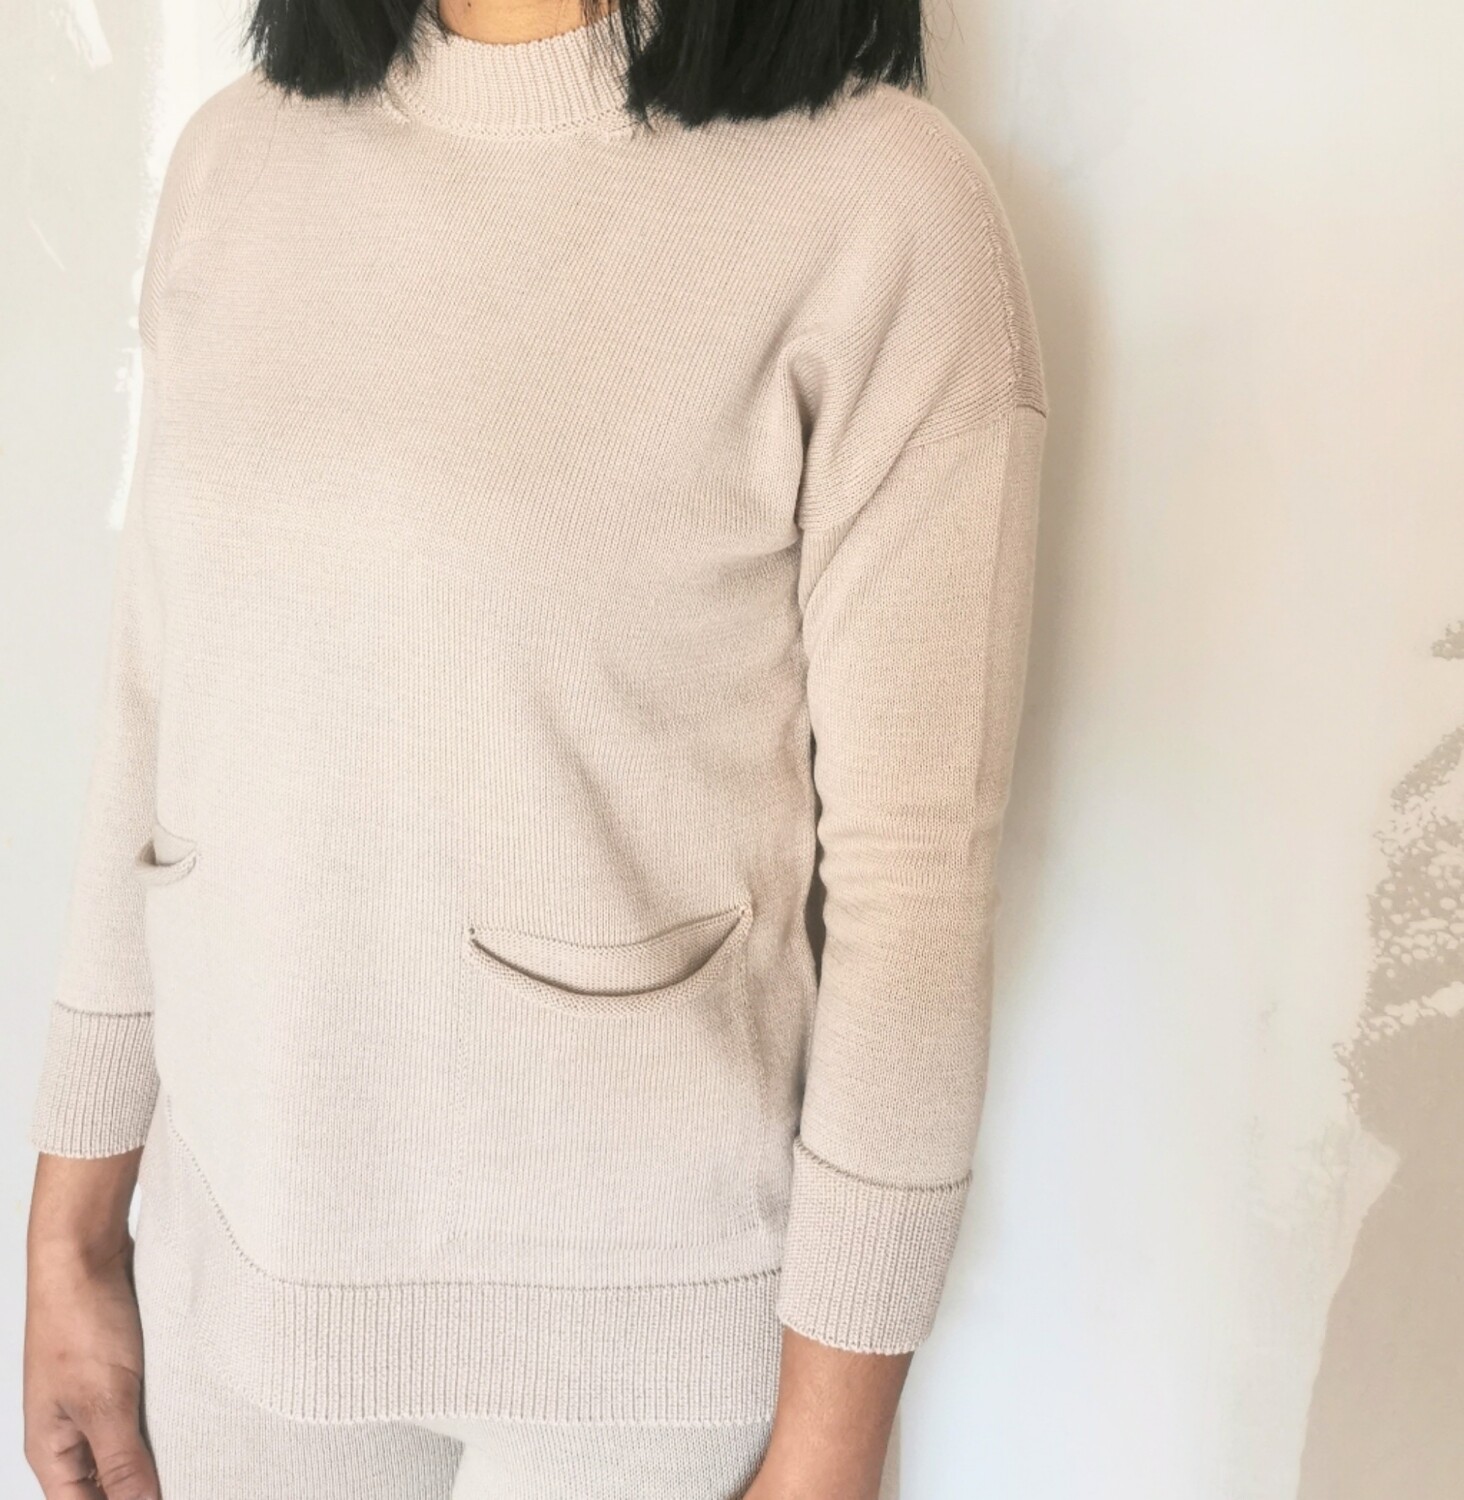 ​Turtleneck sweater with front pockets